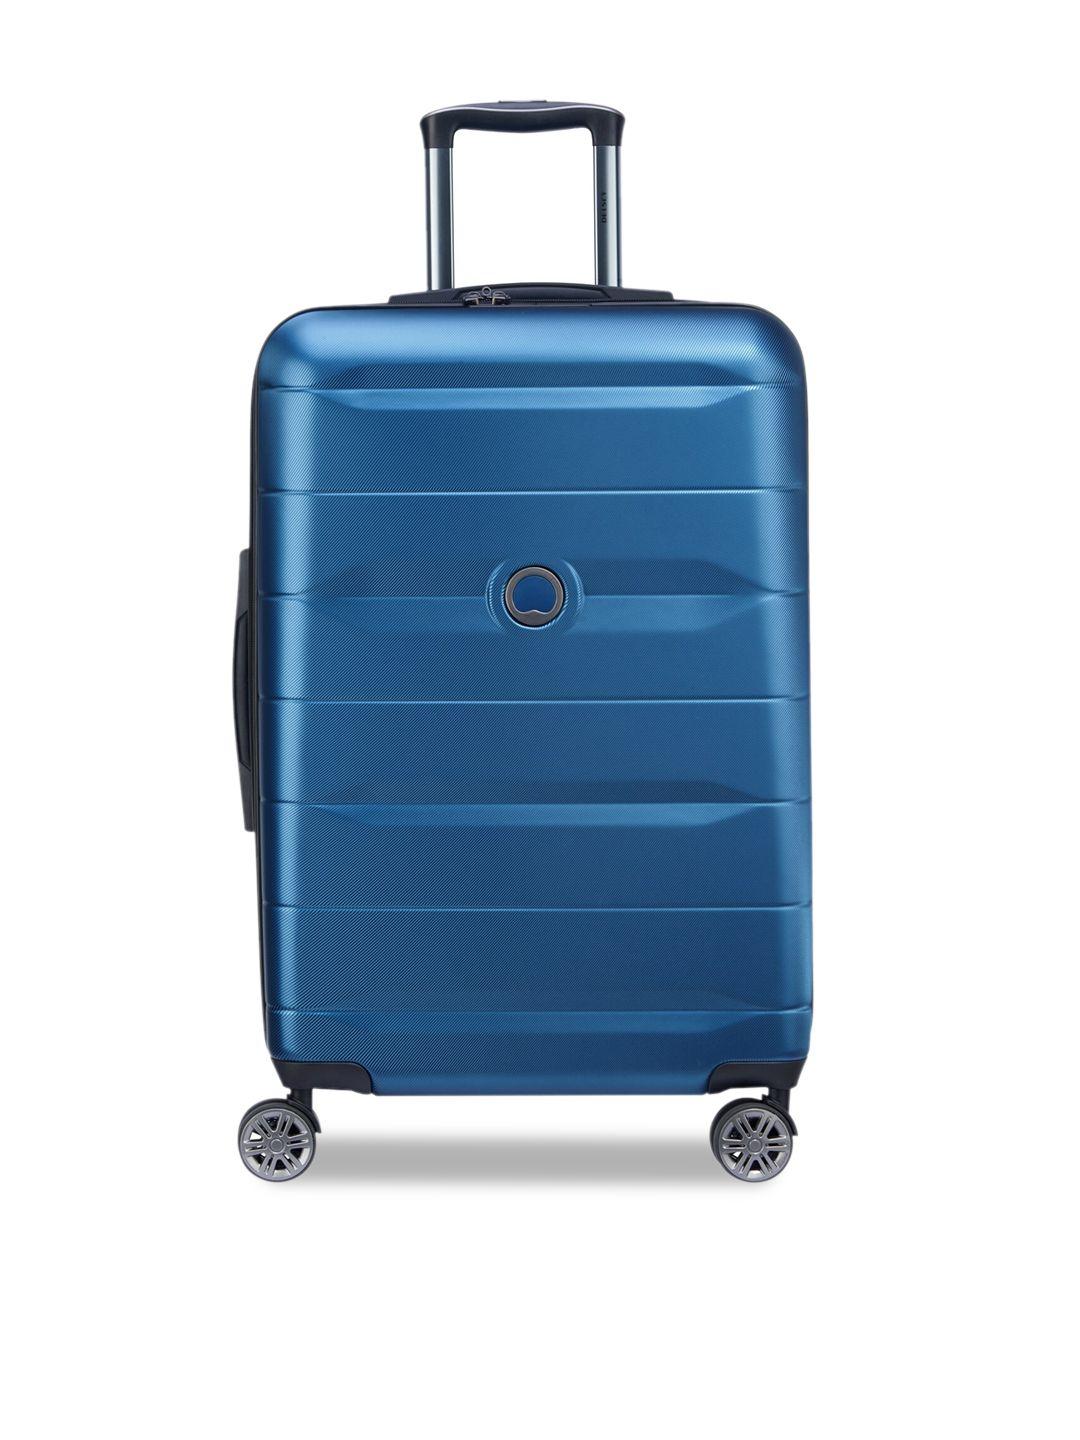 delsey textured hard-sided large trolley suitcase